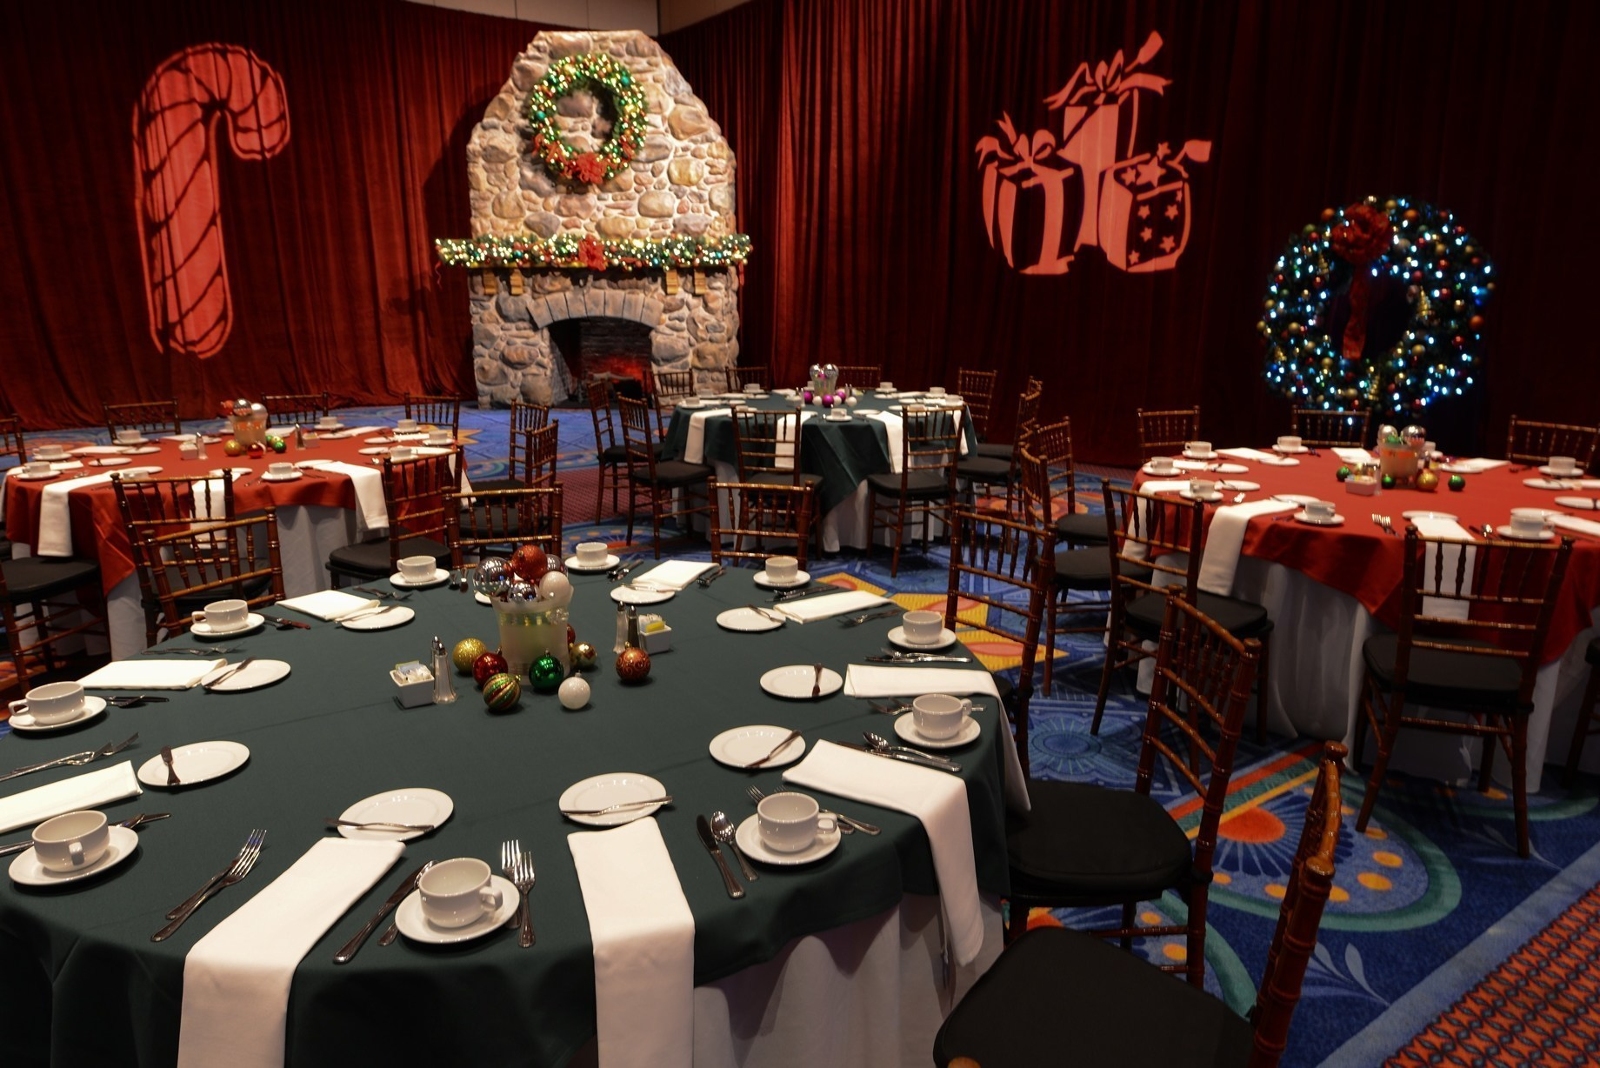 New Holiday Dining Group Events being offered at Walt Disney World for 2016